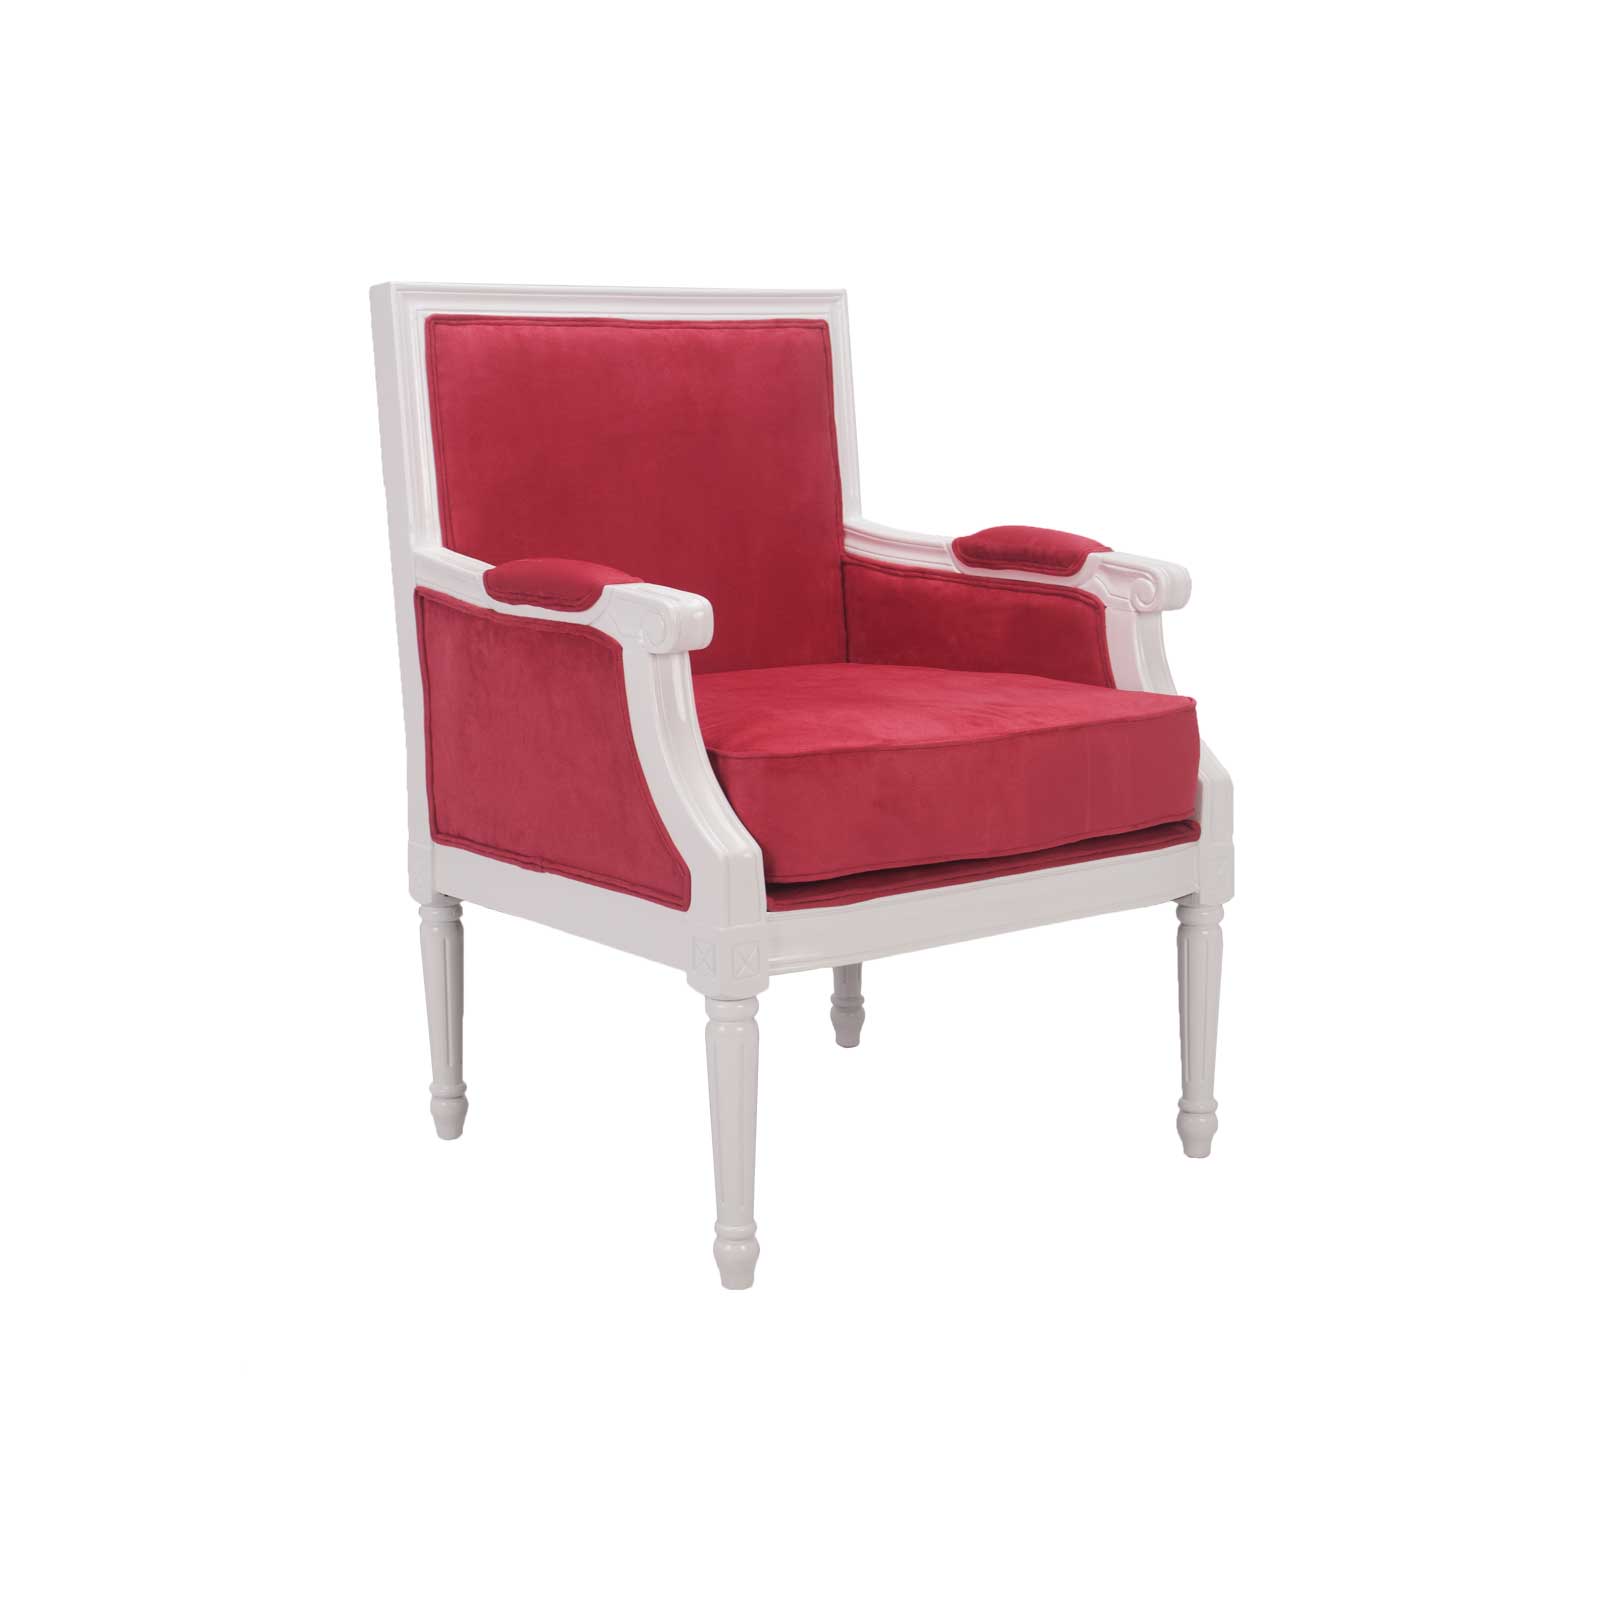 Louie VL Lounge Chair (Pink) FormDecor